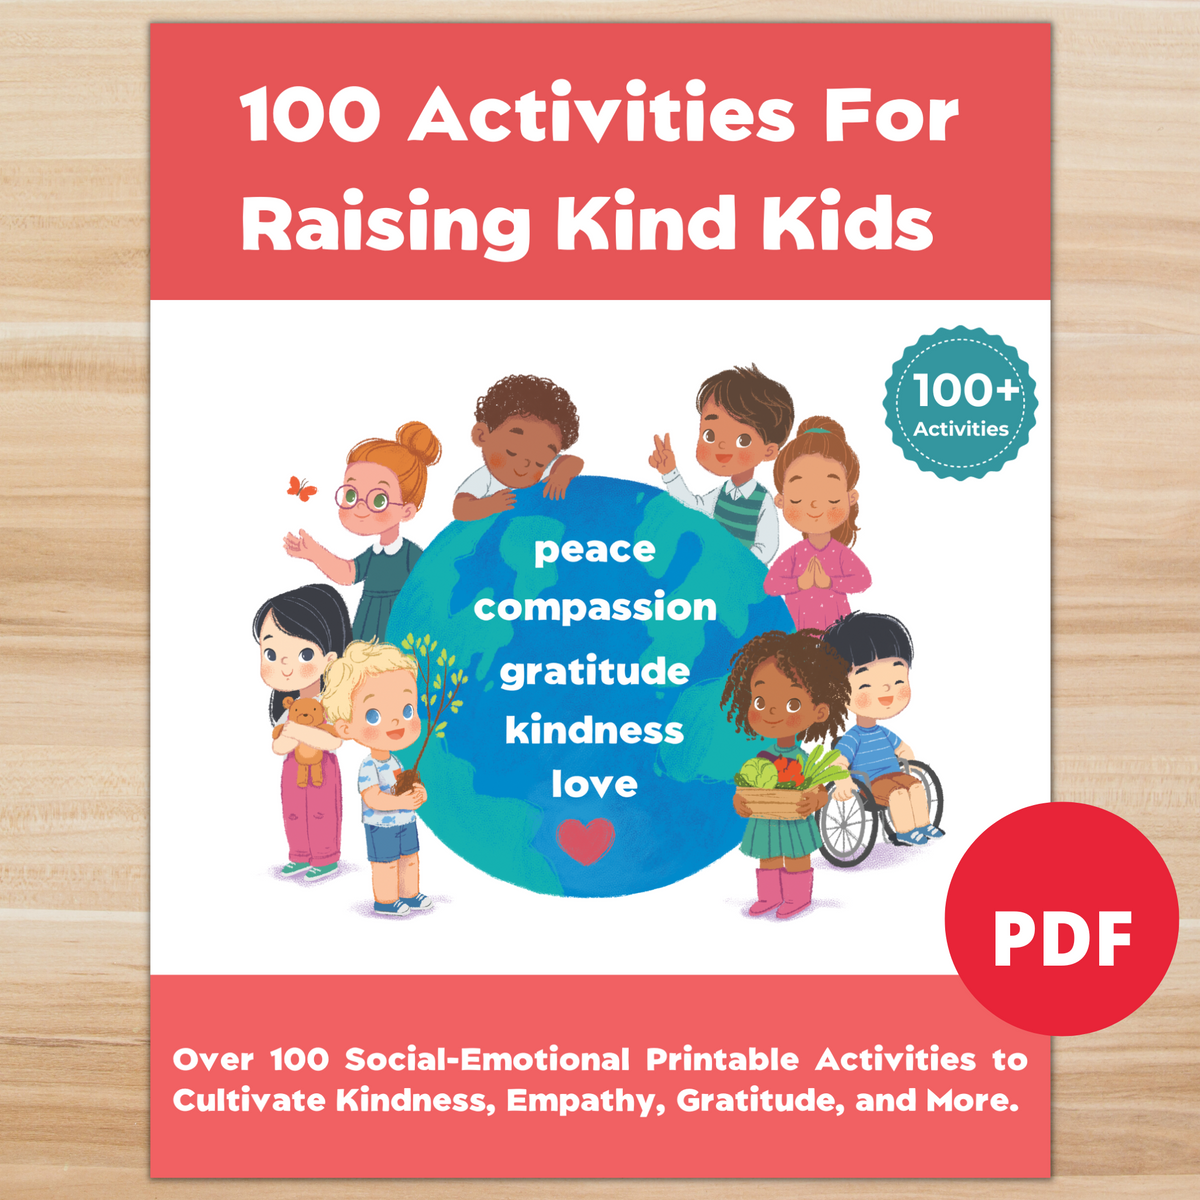 100 Activities for Raising Kind and Caring Kids (PRINTABLE PDF)